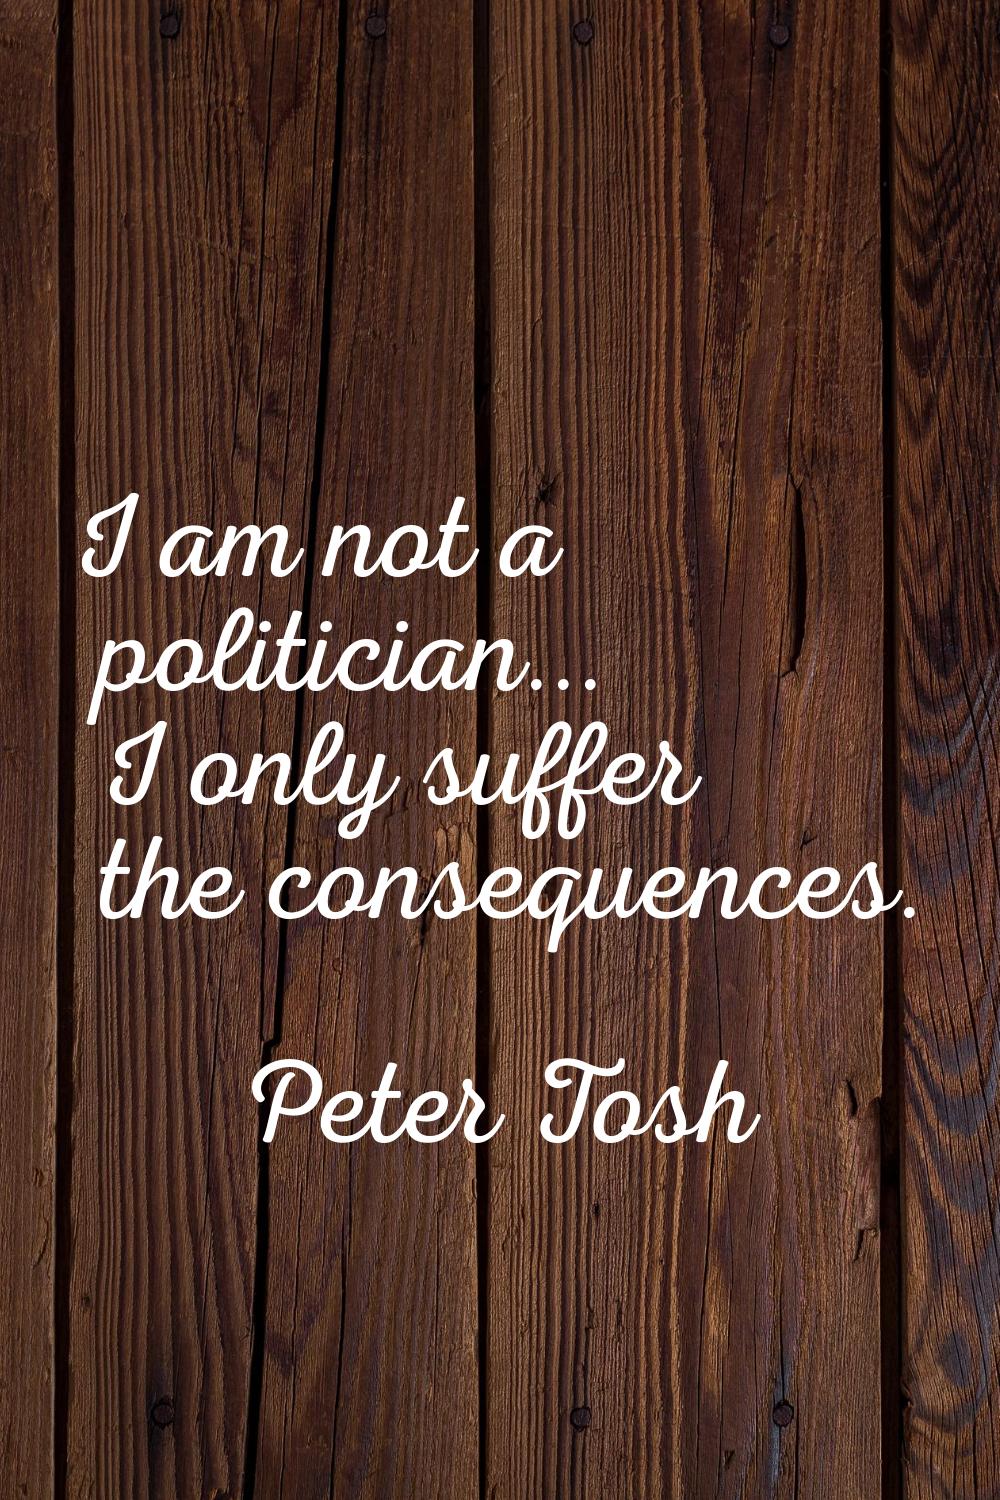 I am not a politician... I only suffer the consequences.